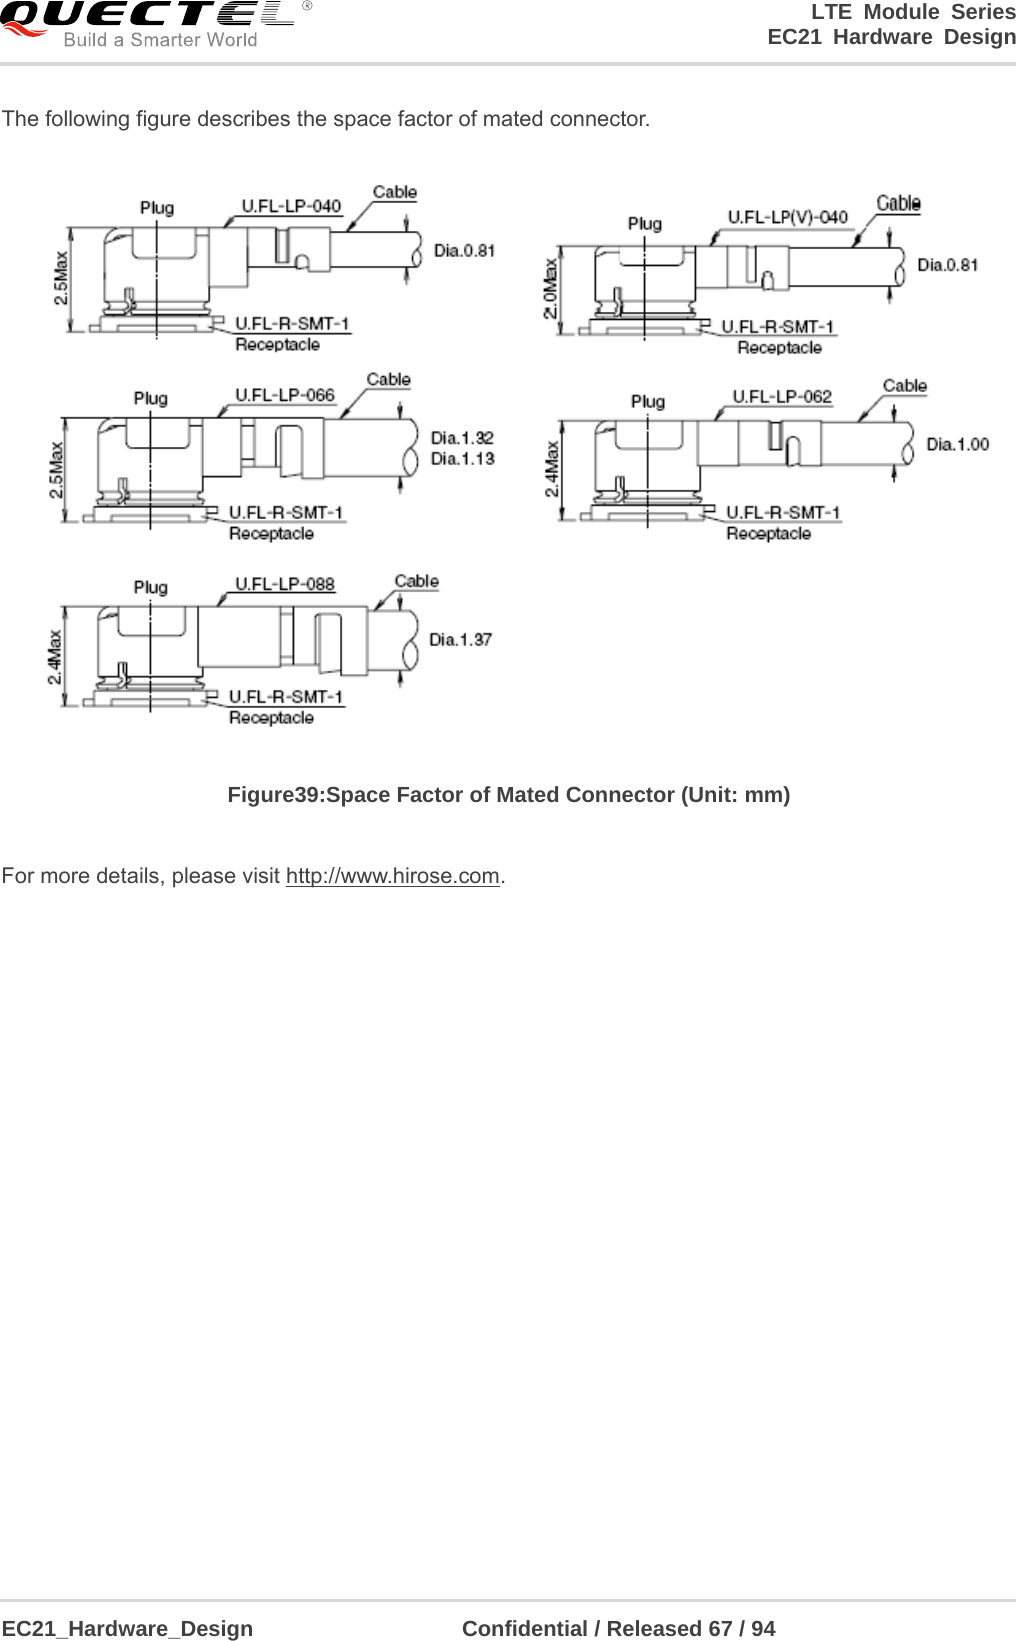 LTE Module Series                                                                 EC21 Hardware Design  EC21_Hardware_Design                   Confidential / Released 67 / 94    The following figure describes the space factor of mated connector.  Figure39:Space Factor of Mated Connector (Unit: mm)  For more details, please visit http://www.hirose.com. 